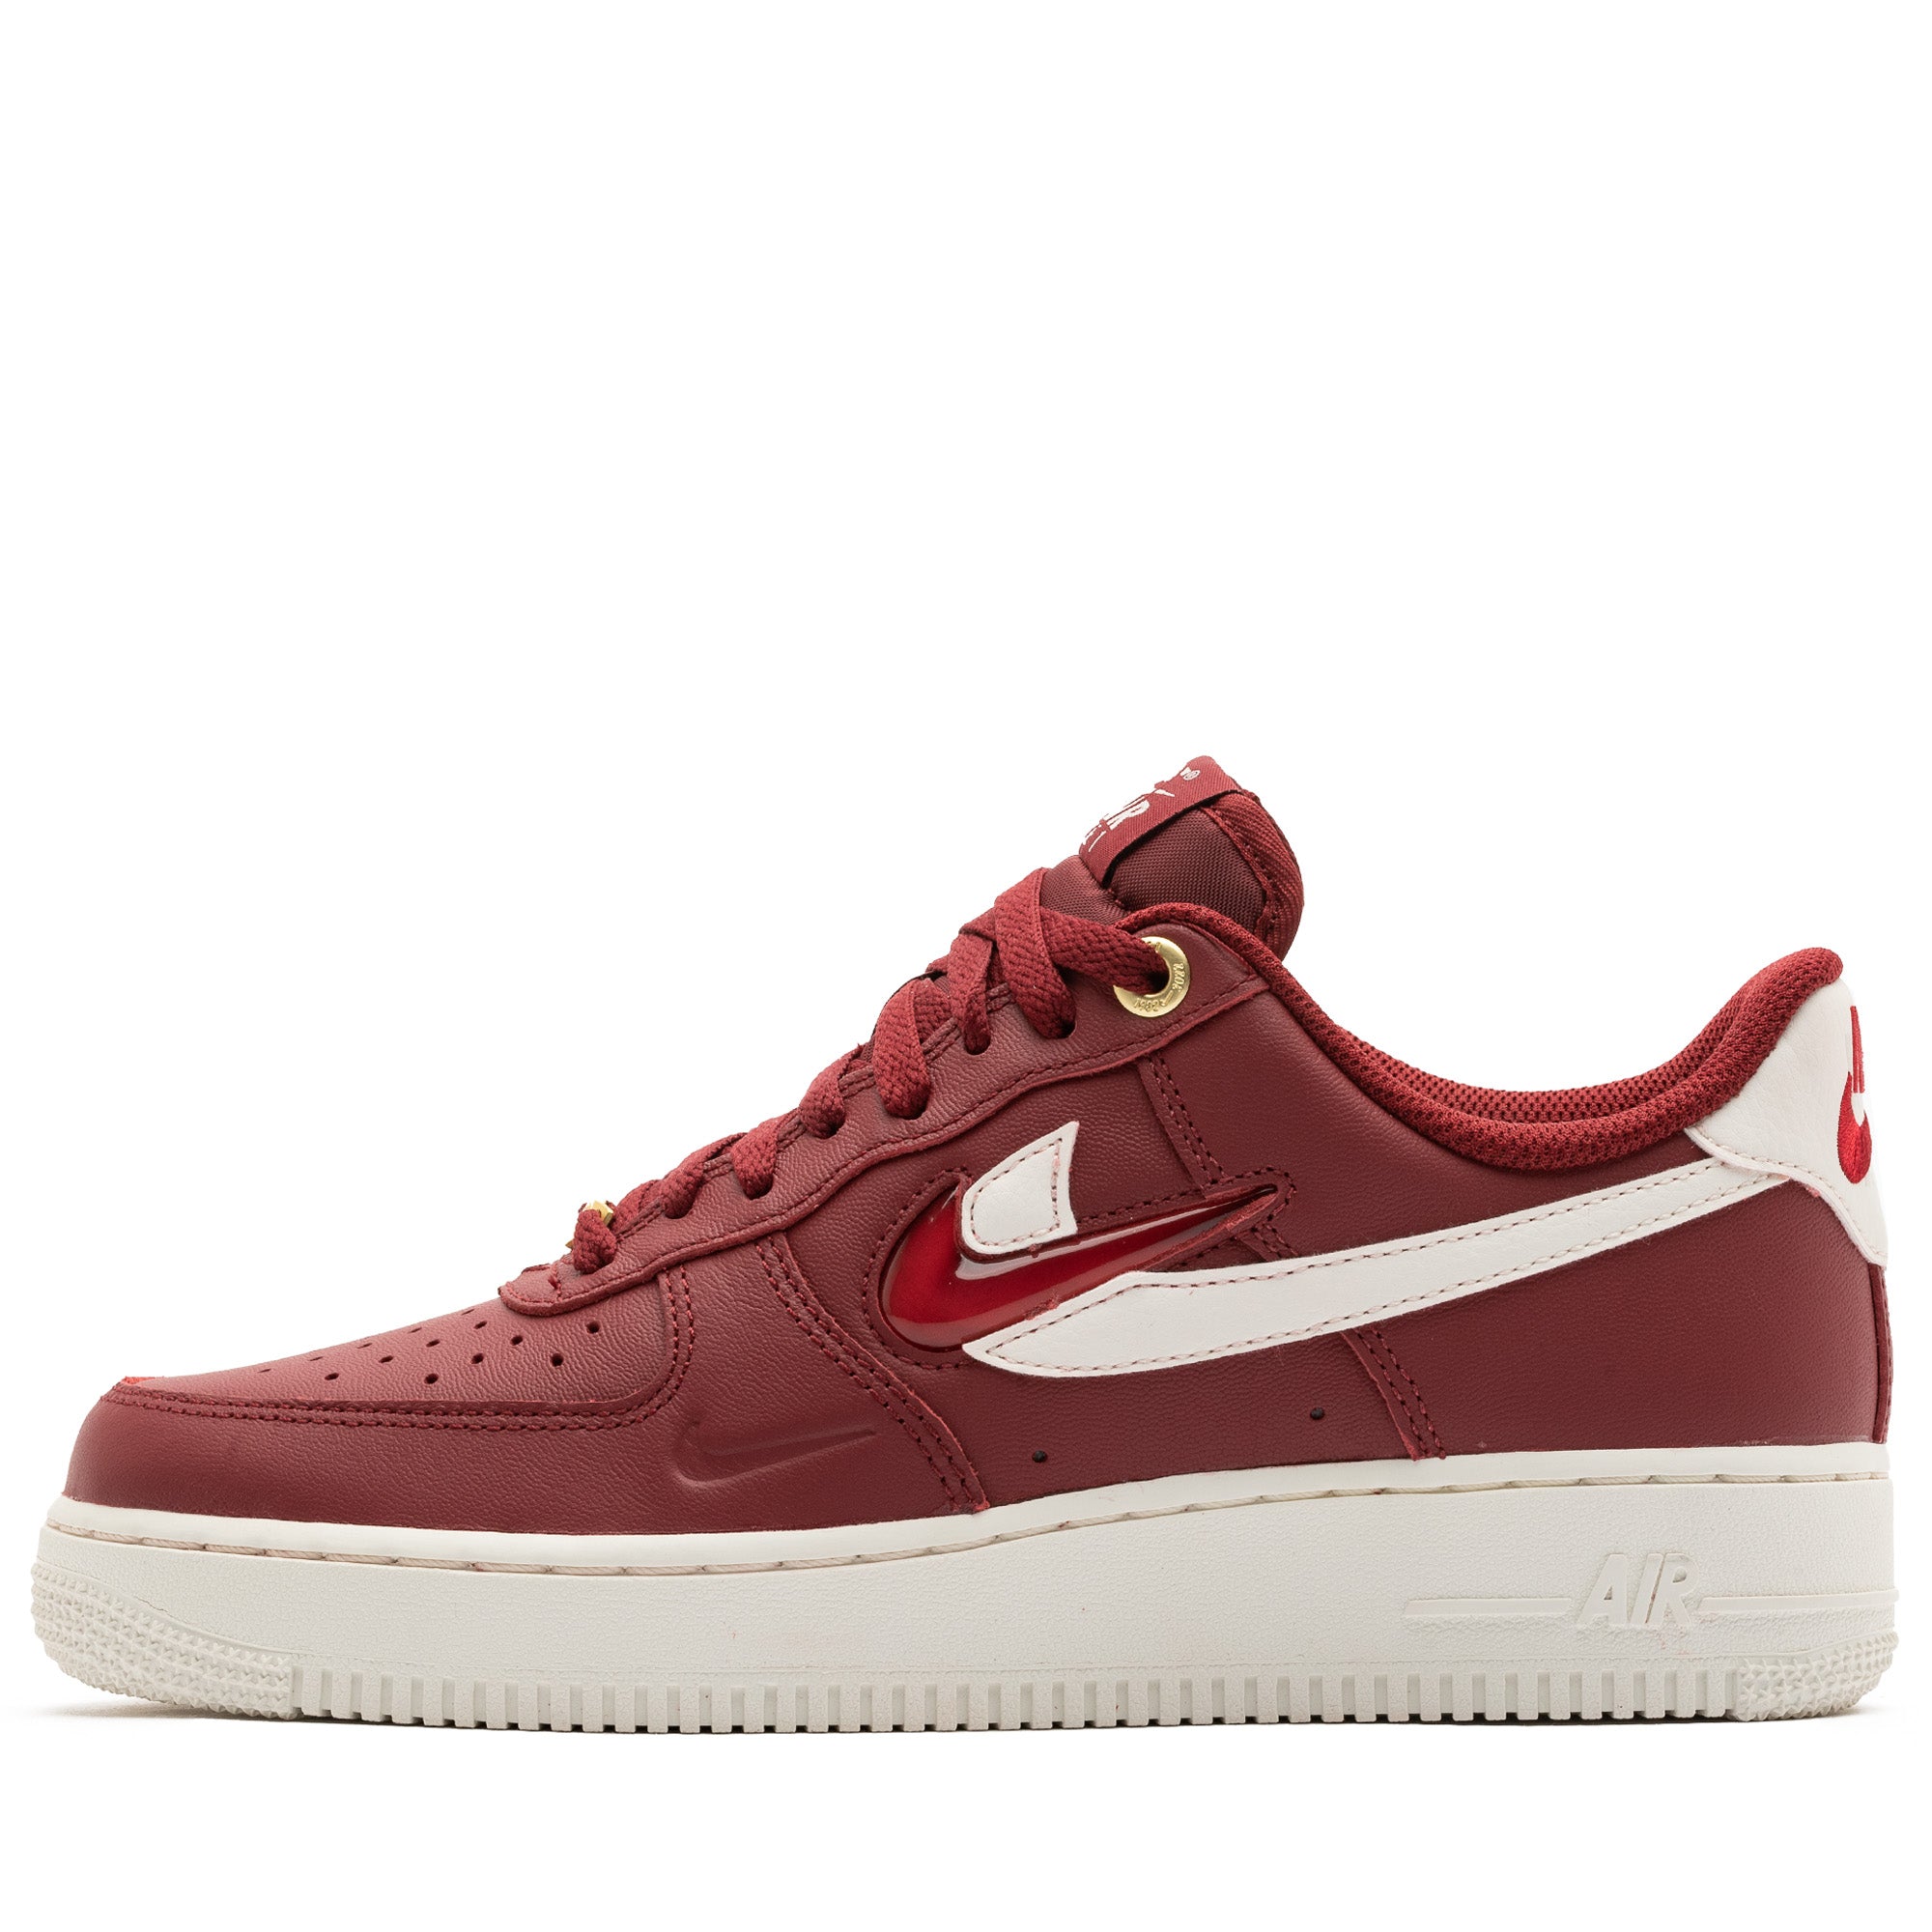 Telégrafo Betsy Trotwood Fragua nike air force preium leather Pef ...